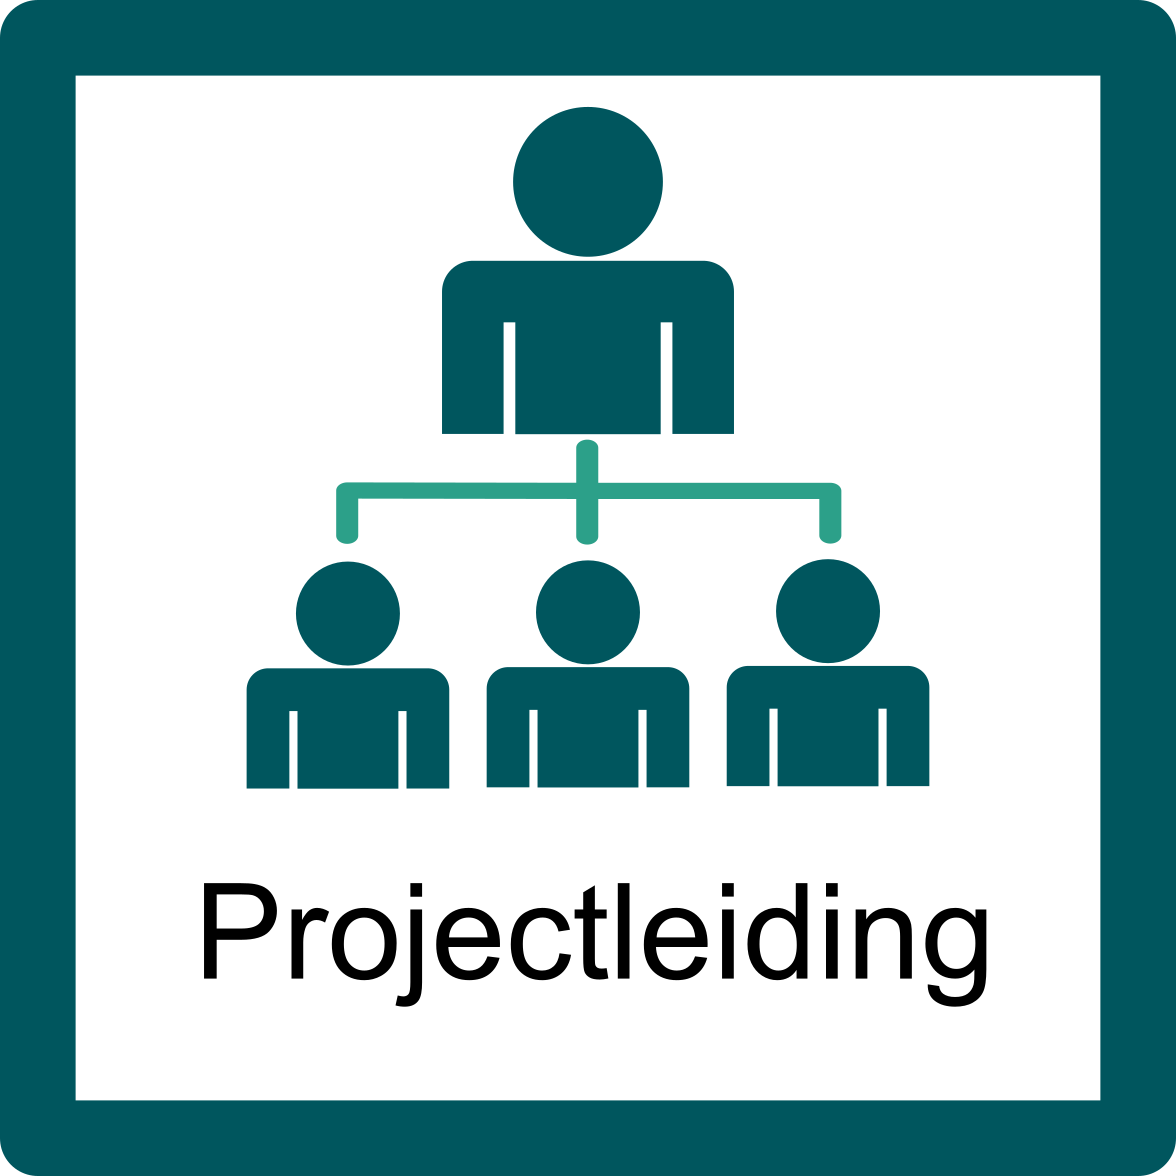 Projectleiding